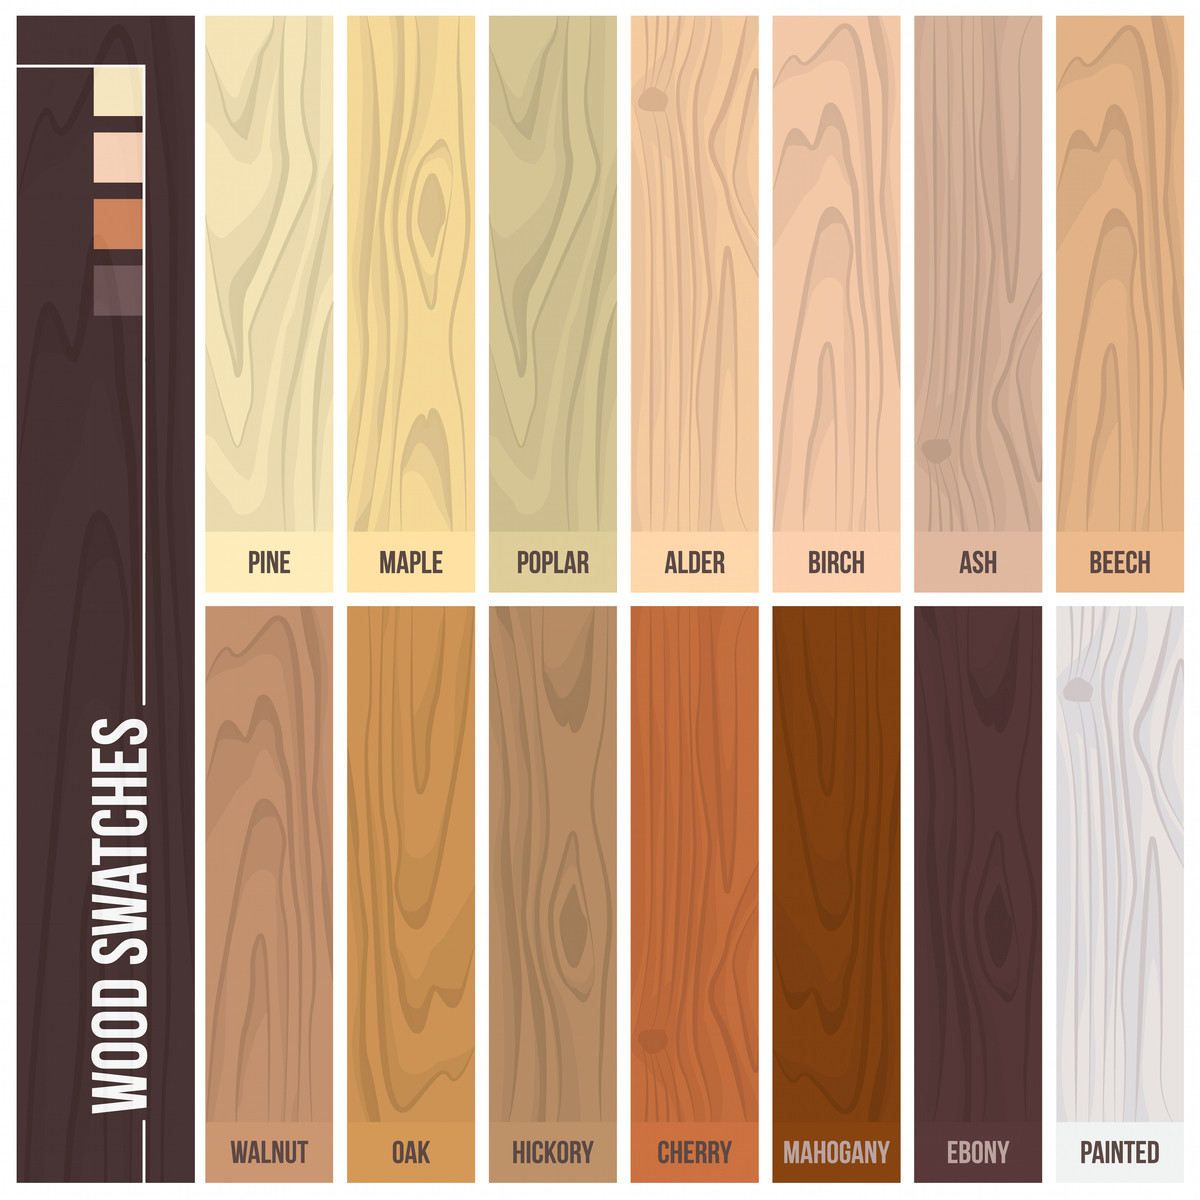 23 Great 3 8 solid Hardwood Flooring 2023 free download 3 8 solid hardwood flooring of 12 types of hardwood flooring species styles edging dimensions within types of hardwood flooring illustrated guide